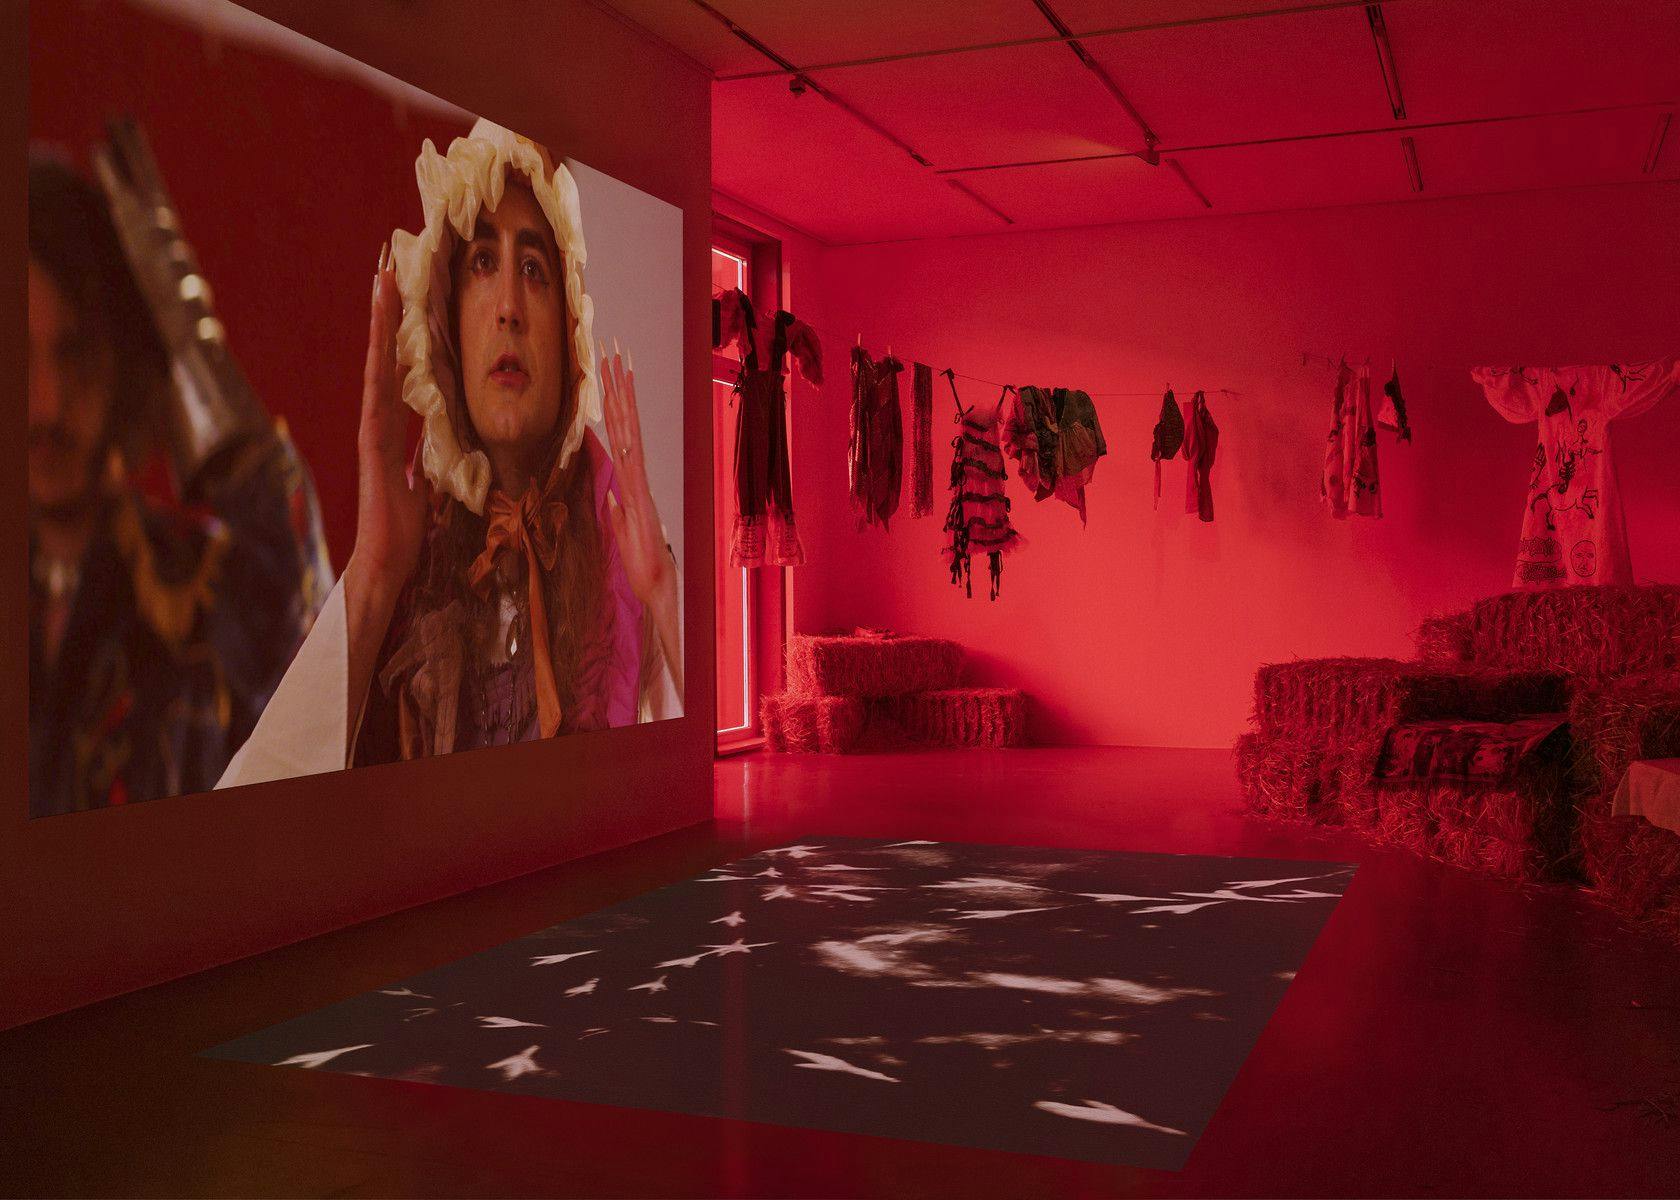 A dim, red-lit gallery space houses a large video projection on the wall of a person in a bonnet, a second projection on the floor of abstracted bird tracks, a clothesline of ruffly garments, and two large piles of hay bales.